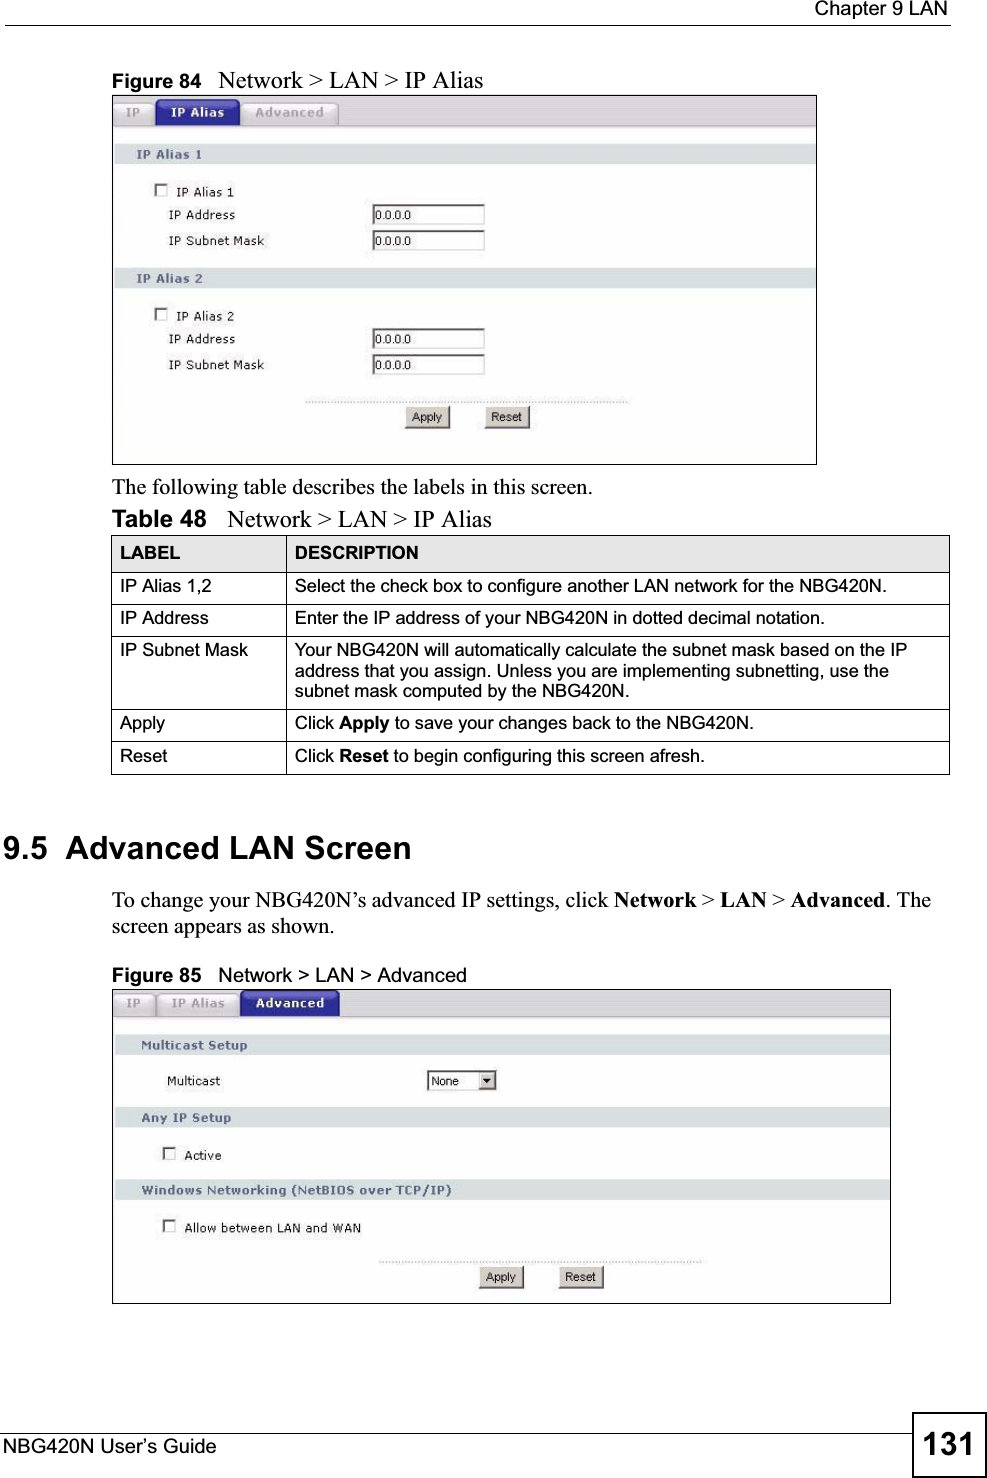  Chapter 9 LANNBG420N User’s Guide 131Figure 84   Network &gt; LAN &gt; IP AliasThe following table describes the labels in this screen.9.5  Advanced LAN ScreenTo change your NBG420N’s advanced IP settings, click Network &gt; LAN &gt; Advanced. The screen appears as shown.Figure 85   Network &gt; LAN &gt; Advanced   Table 48   Network &gt; LAN &gt; IP AliasLABEL DESCRIPTIONIP Alias 1,2 Select the check box to configure another LAN network for the NBG420N.IP Address Enter the IP address of your NBG420N in dotted decimal notation. IP Subnet Mask Your NBG420N will automatically calculate the subnet mask based on the IP address that you assign. Unless you are implementing subnetting, use the subnet mask computed by the NBG420N.Apply Click Apply to save your changes back to the NBG420N.Reset Click Reset to begin configuring this screen afresh.